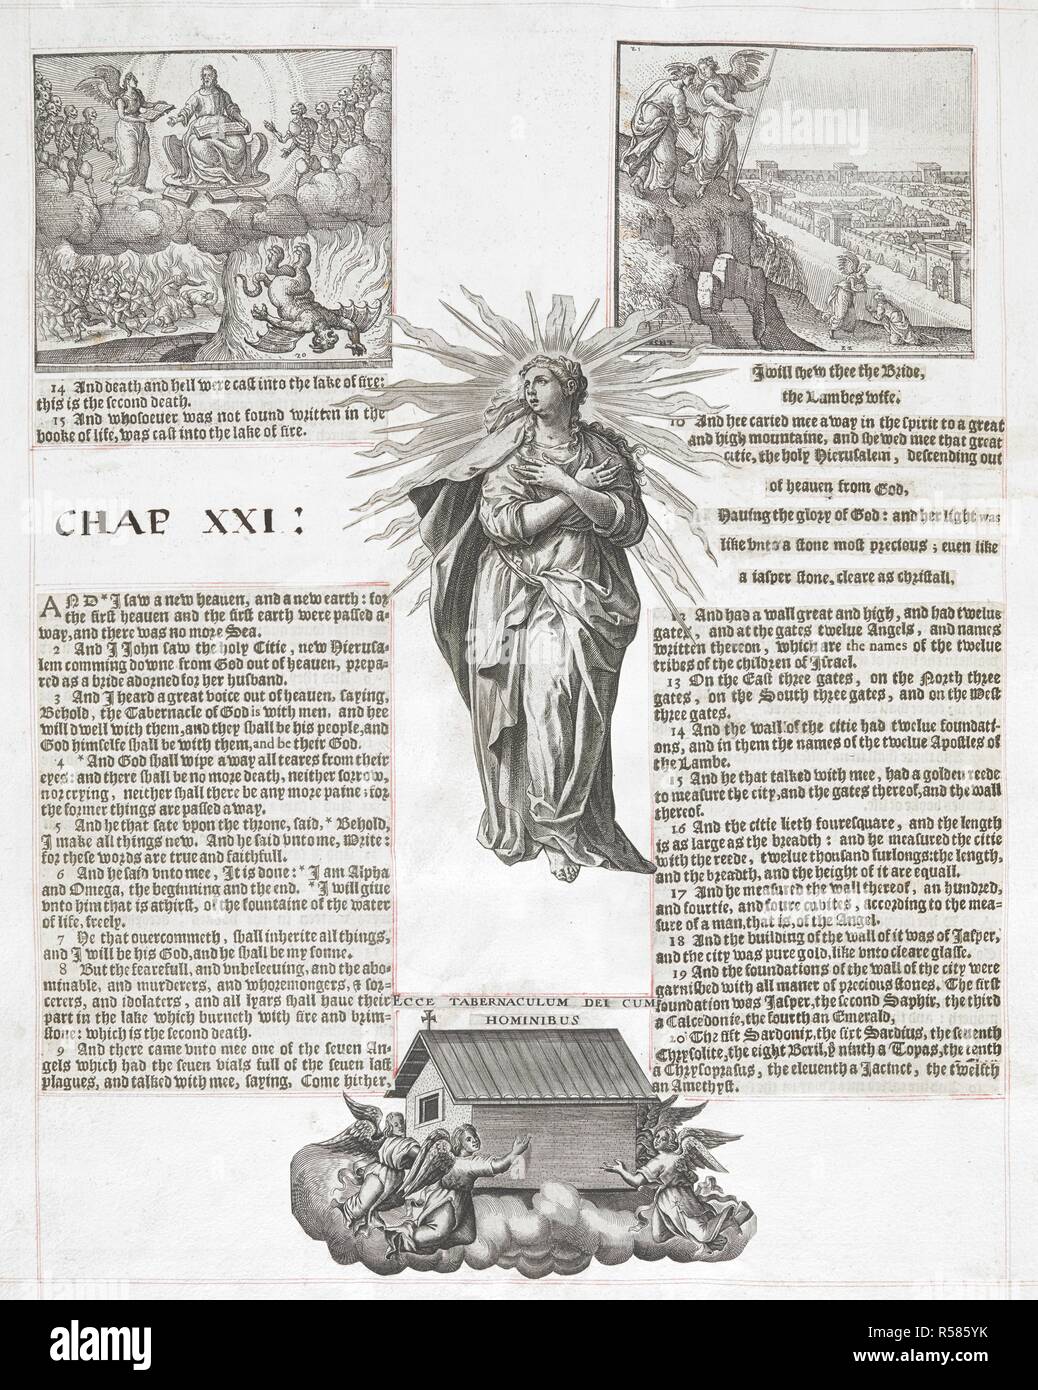 Scenes from the book of revelations. Acta Apostolorum elegantiss. monochromatis delineata. (The Revelation of S. John the Divine.) [Compiled by N. Ferrar and his family.]. [Little Gidding, 1635?]. Source: C.23.e.3 page from chapter XXI. Stock Photo